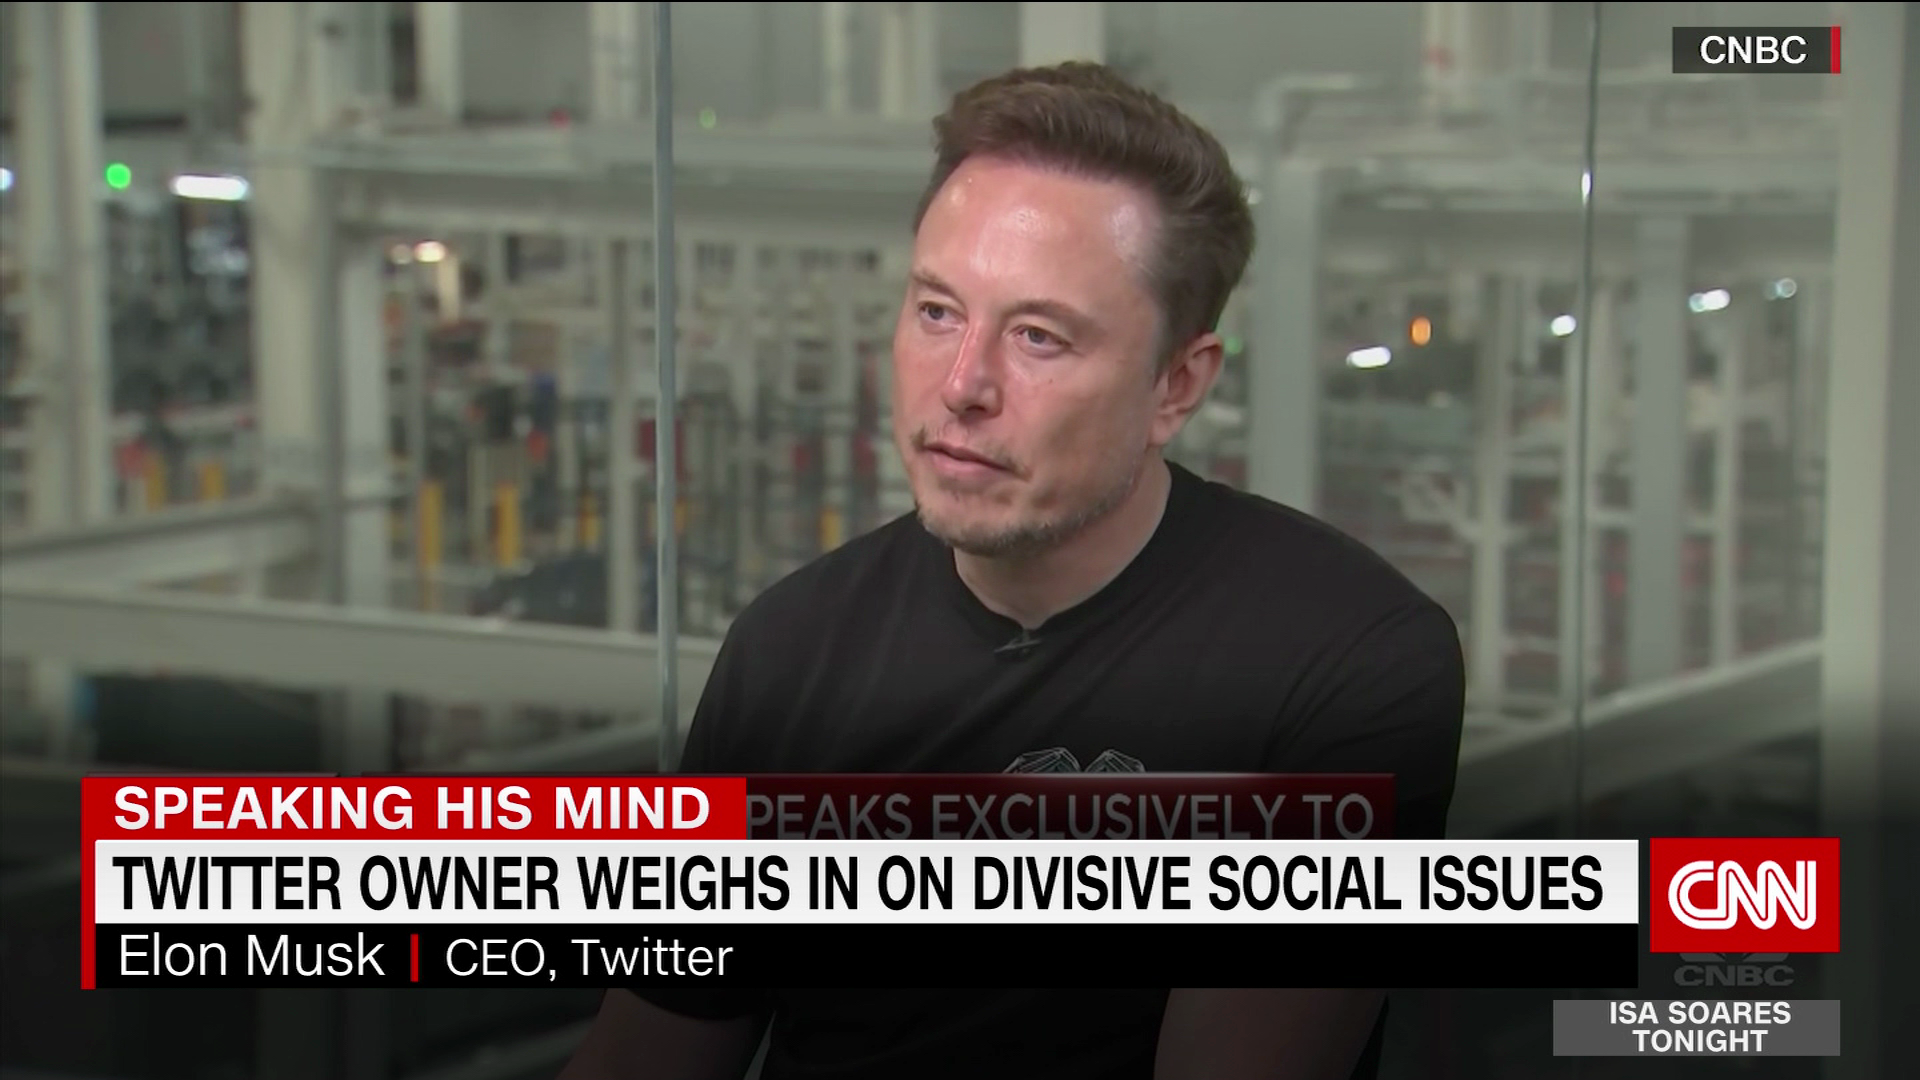 Breast-obsessed' Elon Musk paints over the 'W' on Twitter sign